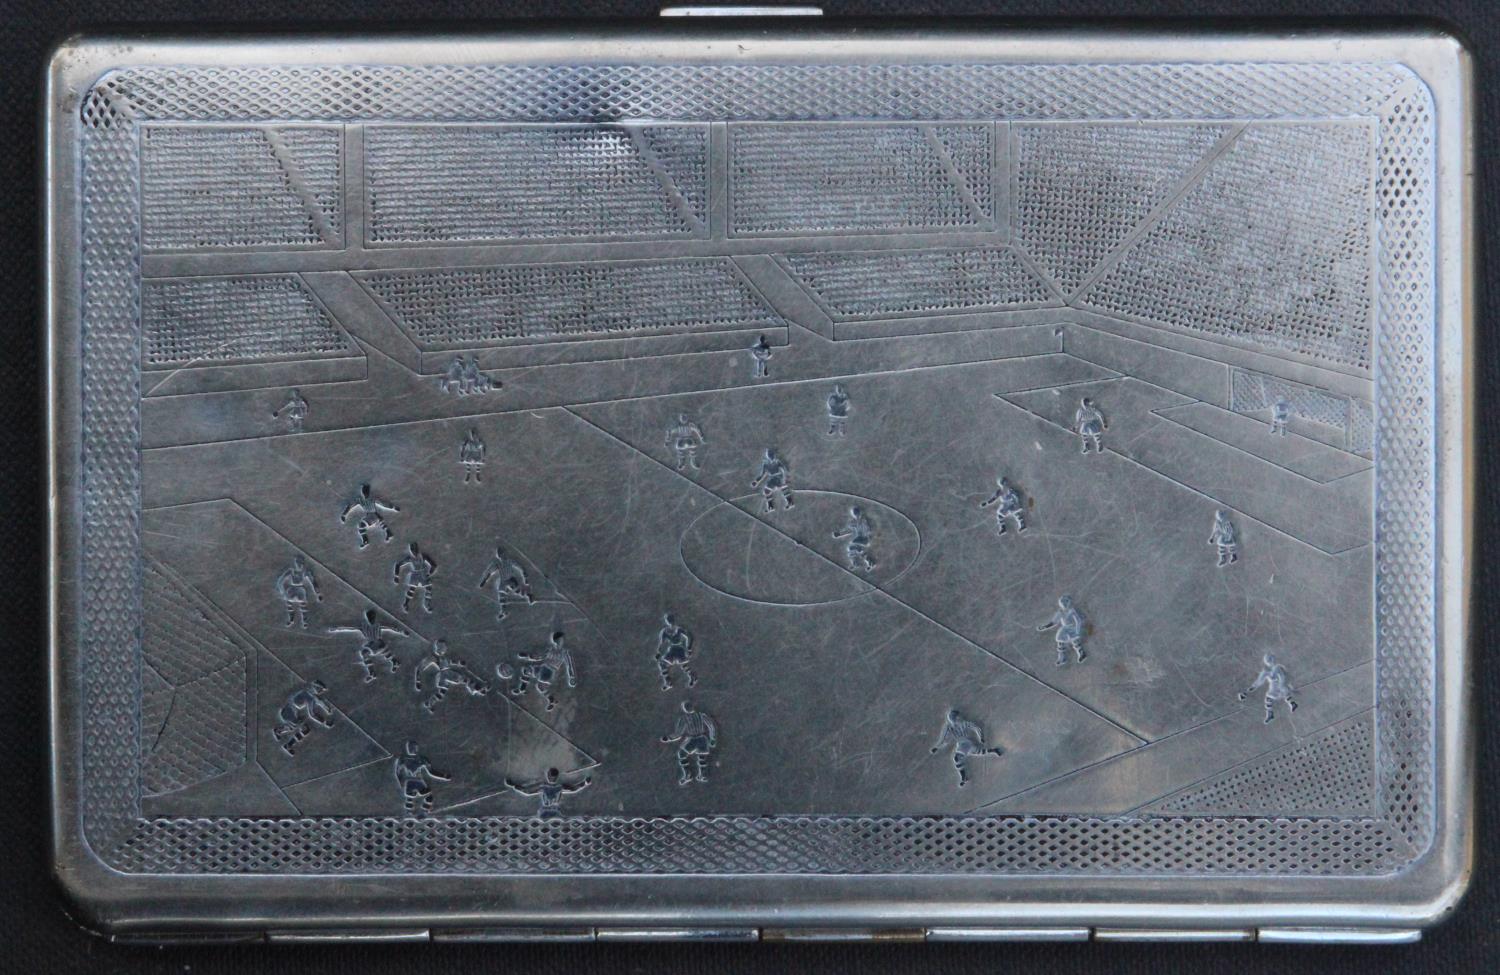 Scottish Football Association. Silver plated cigarette case issued by Scottish F.A. in 1950. With